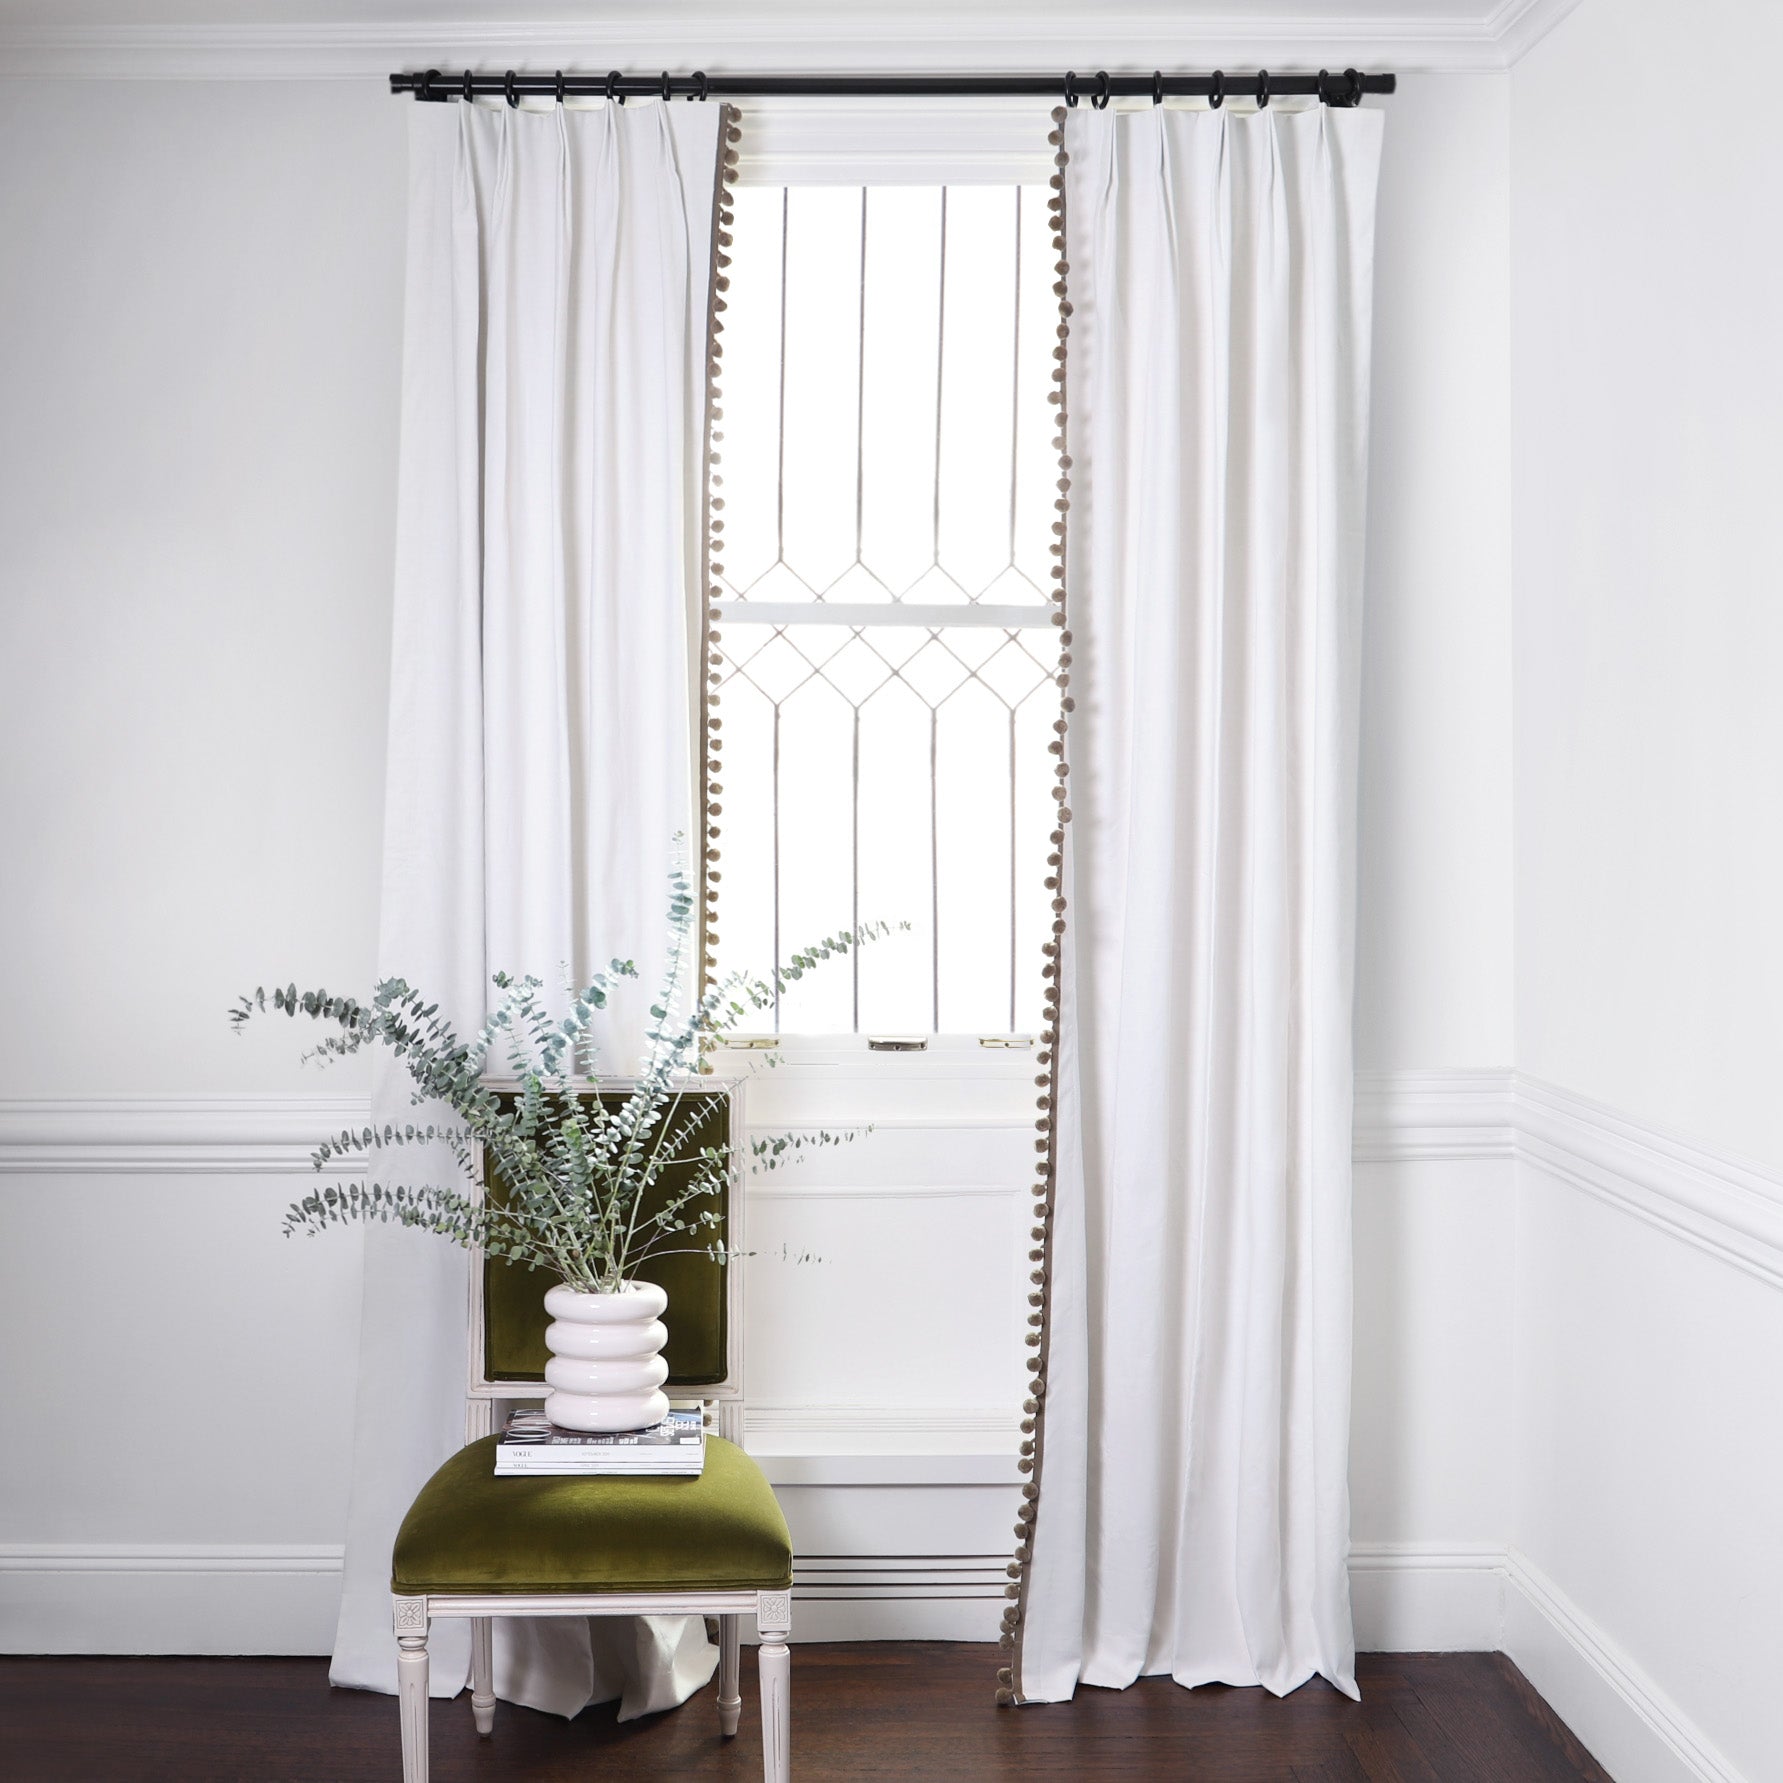 White Cotton Curtains with sage green pom poms on metal rod in front of an illuminated window with Sage Green Velvet chair with plants in white vase on top of magazines. 